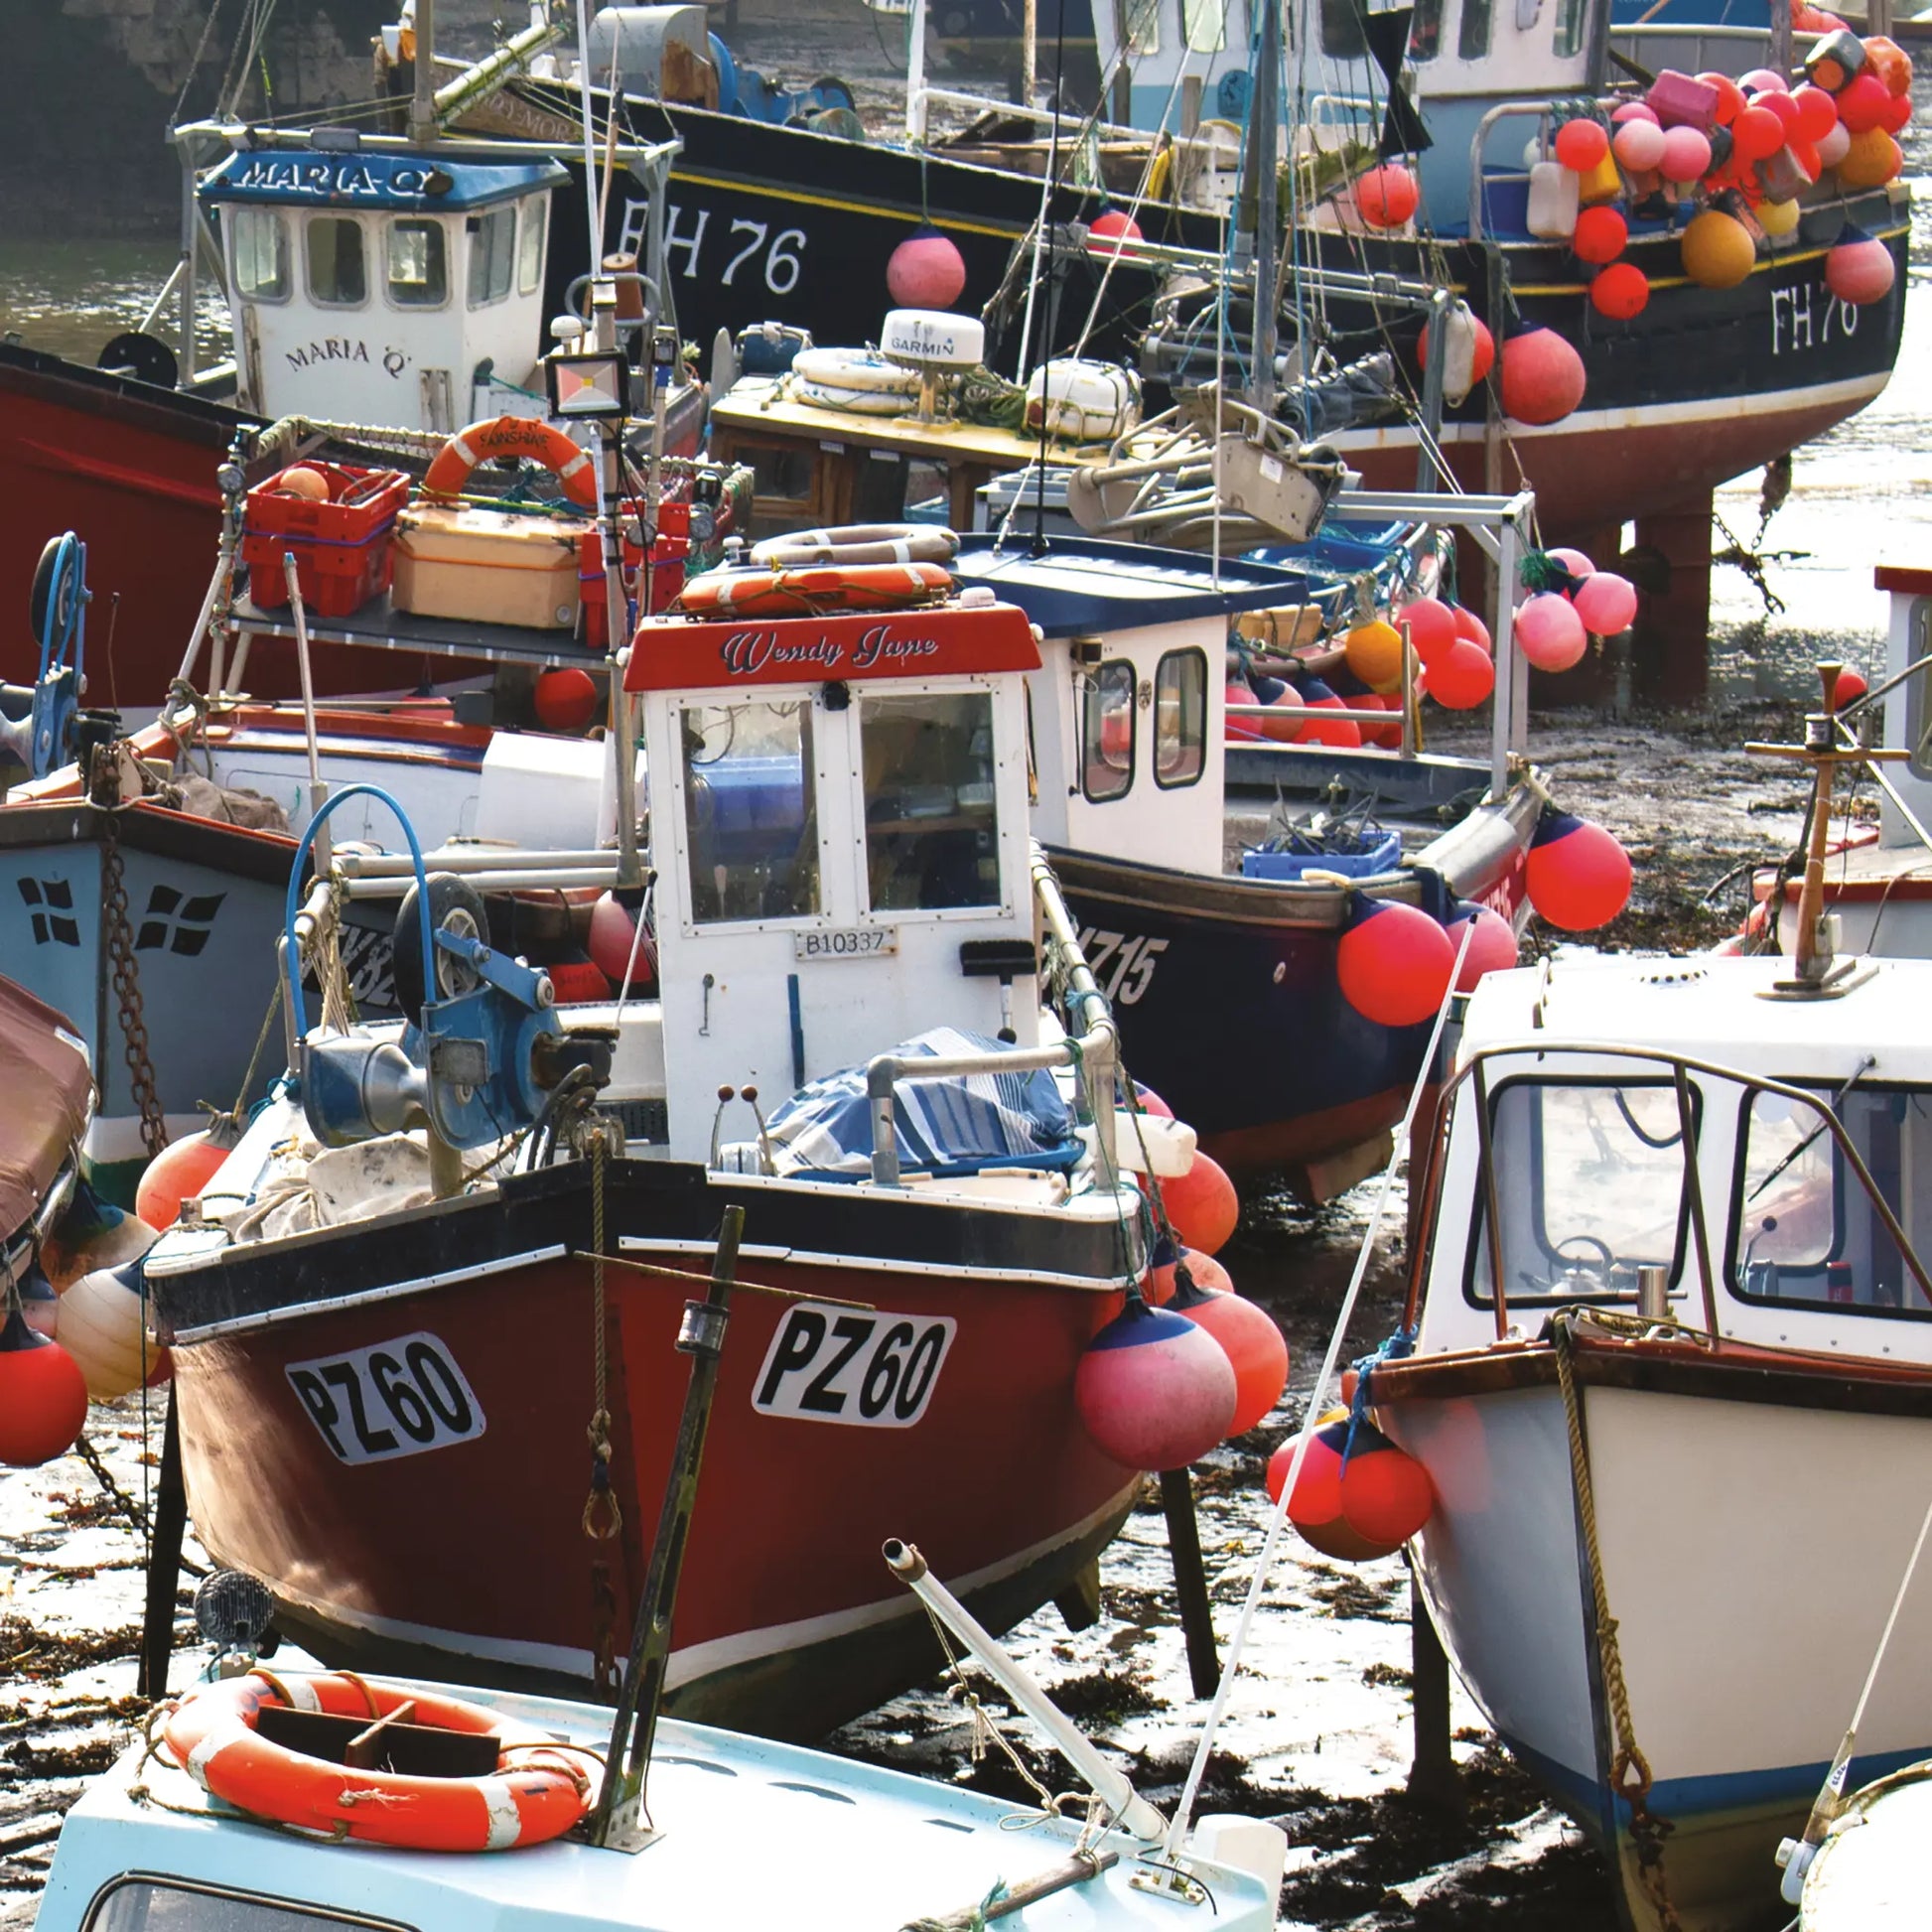 Cornish greetings card image of boats at low tide in Mevagissey Harbour, blues and reds